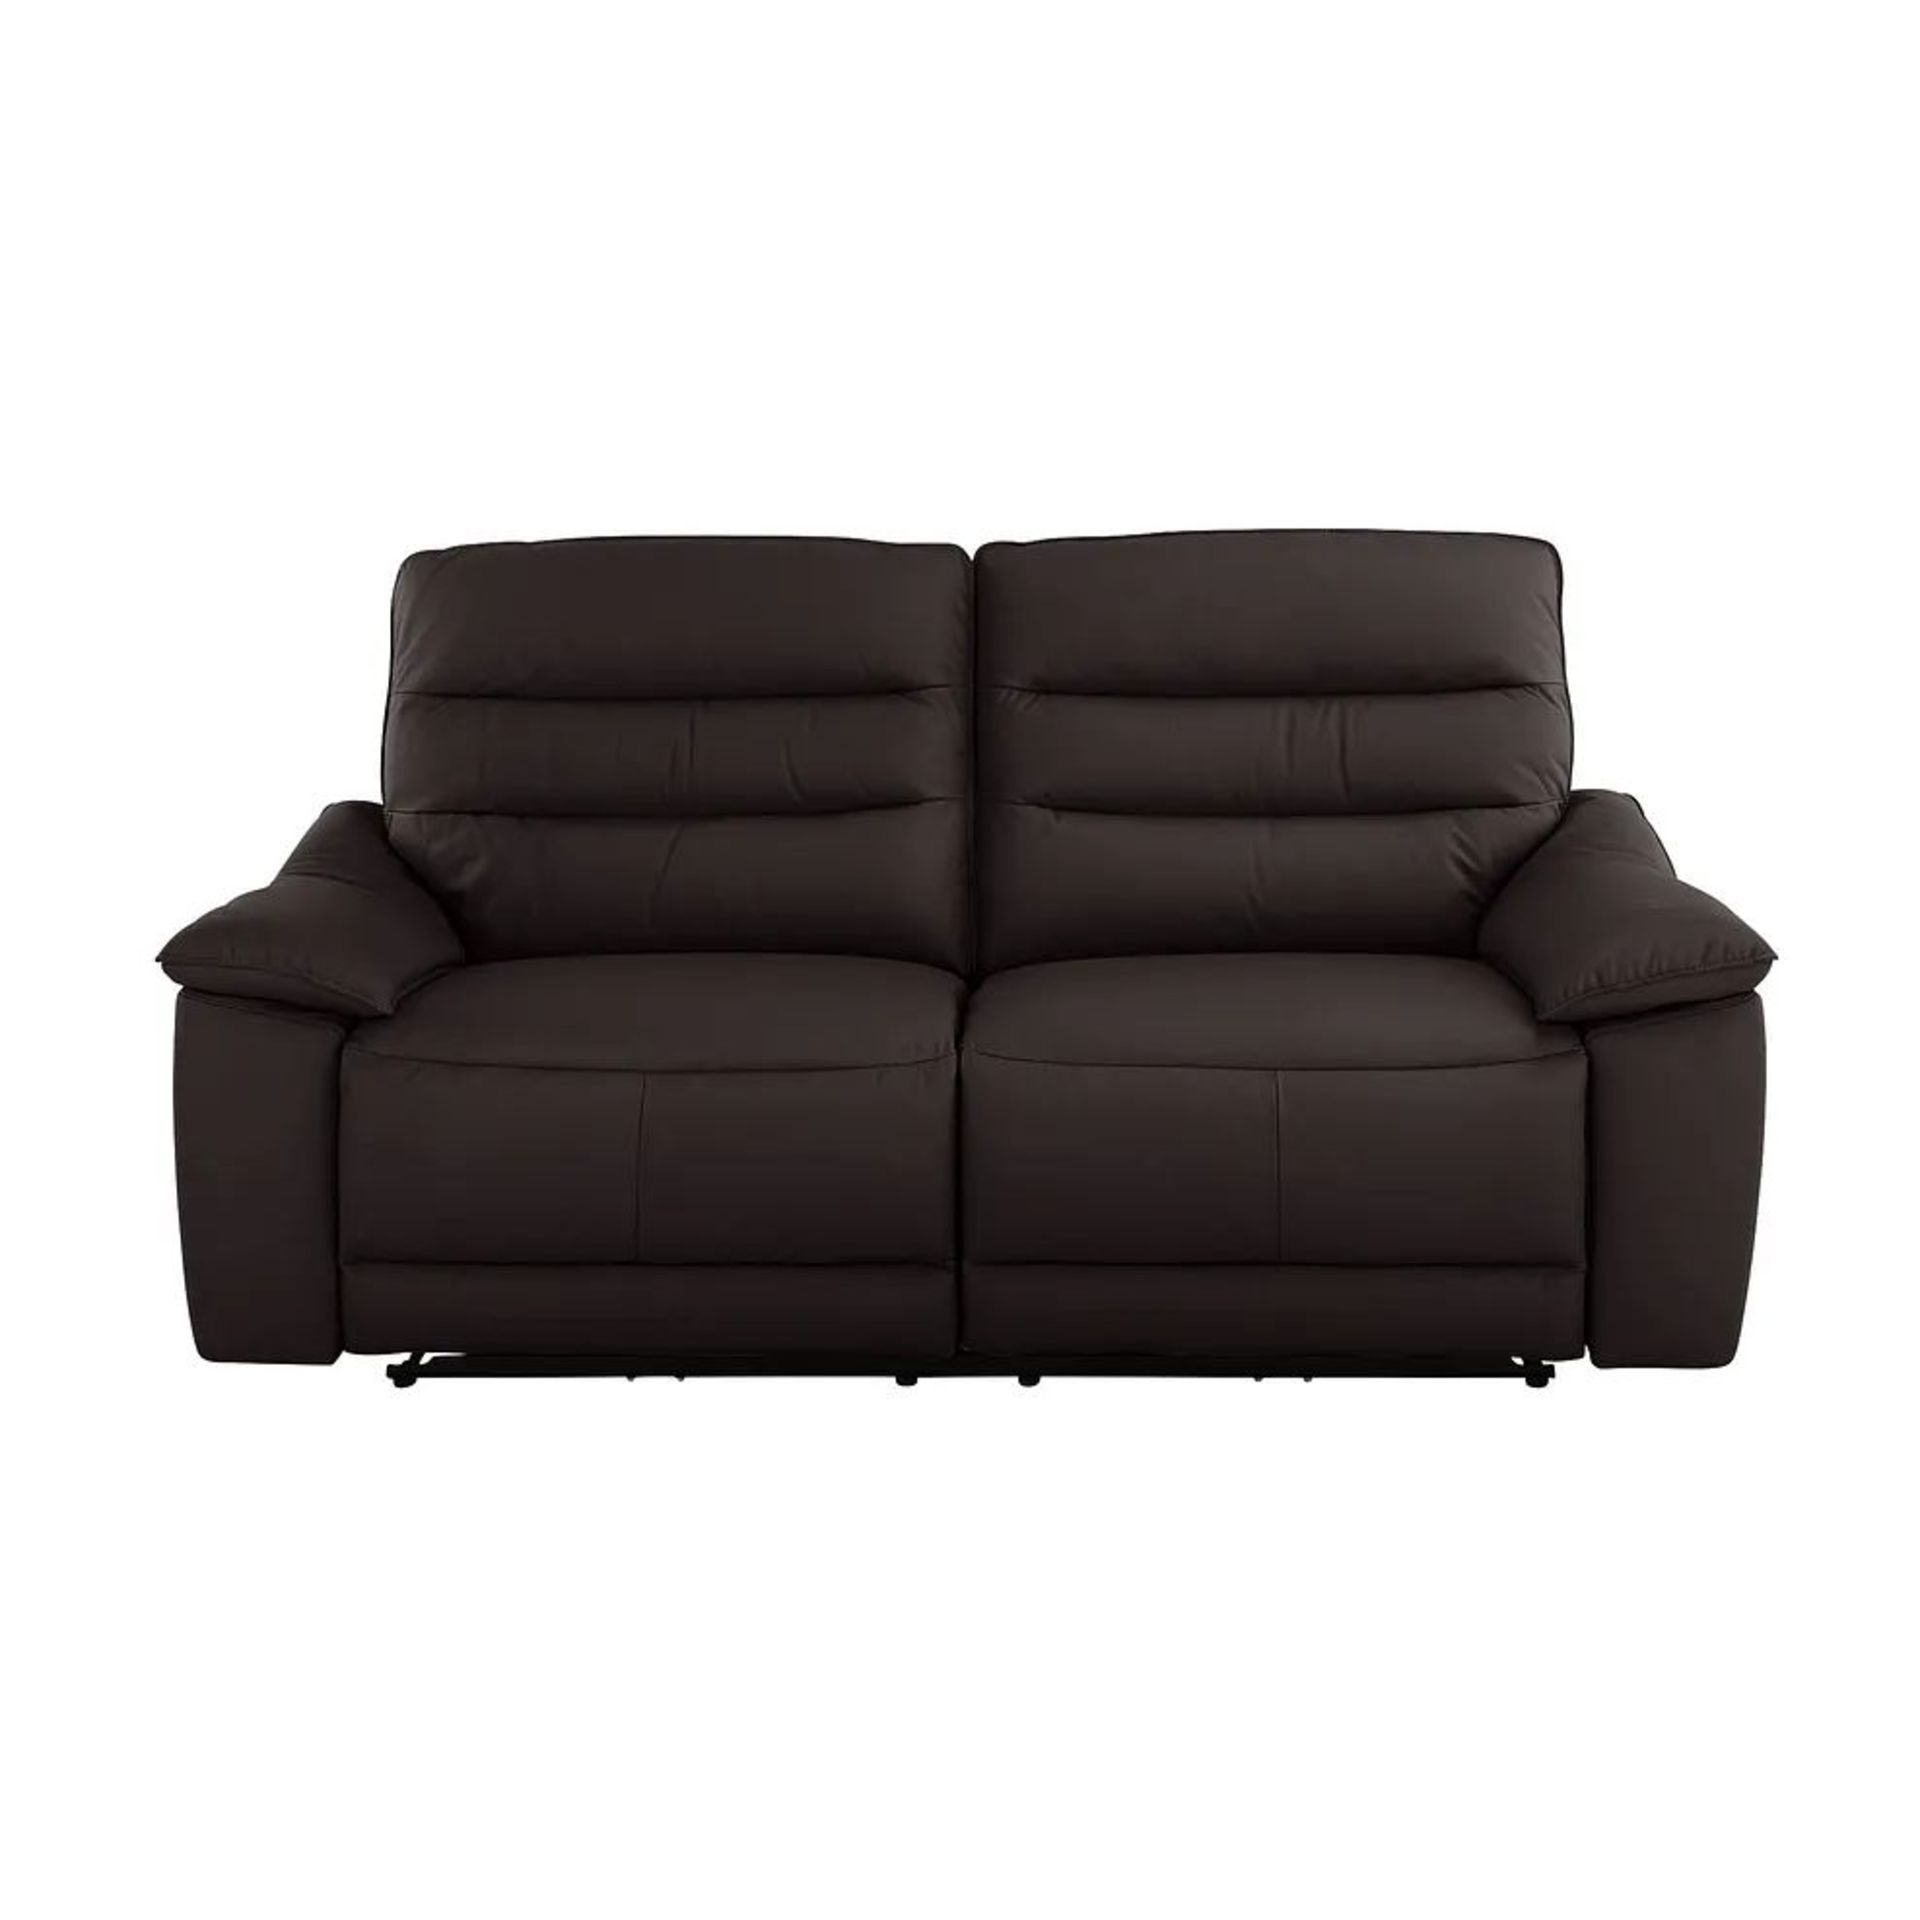 BRAND NEW CARTER 3 Seater Electric Recliner Sofa - BROWN LEATHER. RRP £1699. Showcasing classic - Bild 2 aus 11